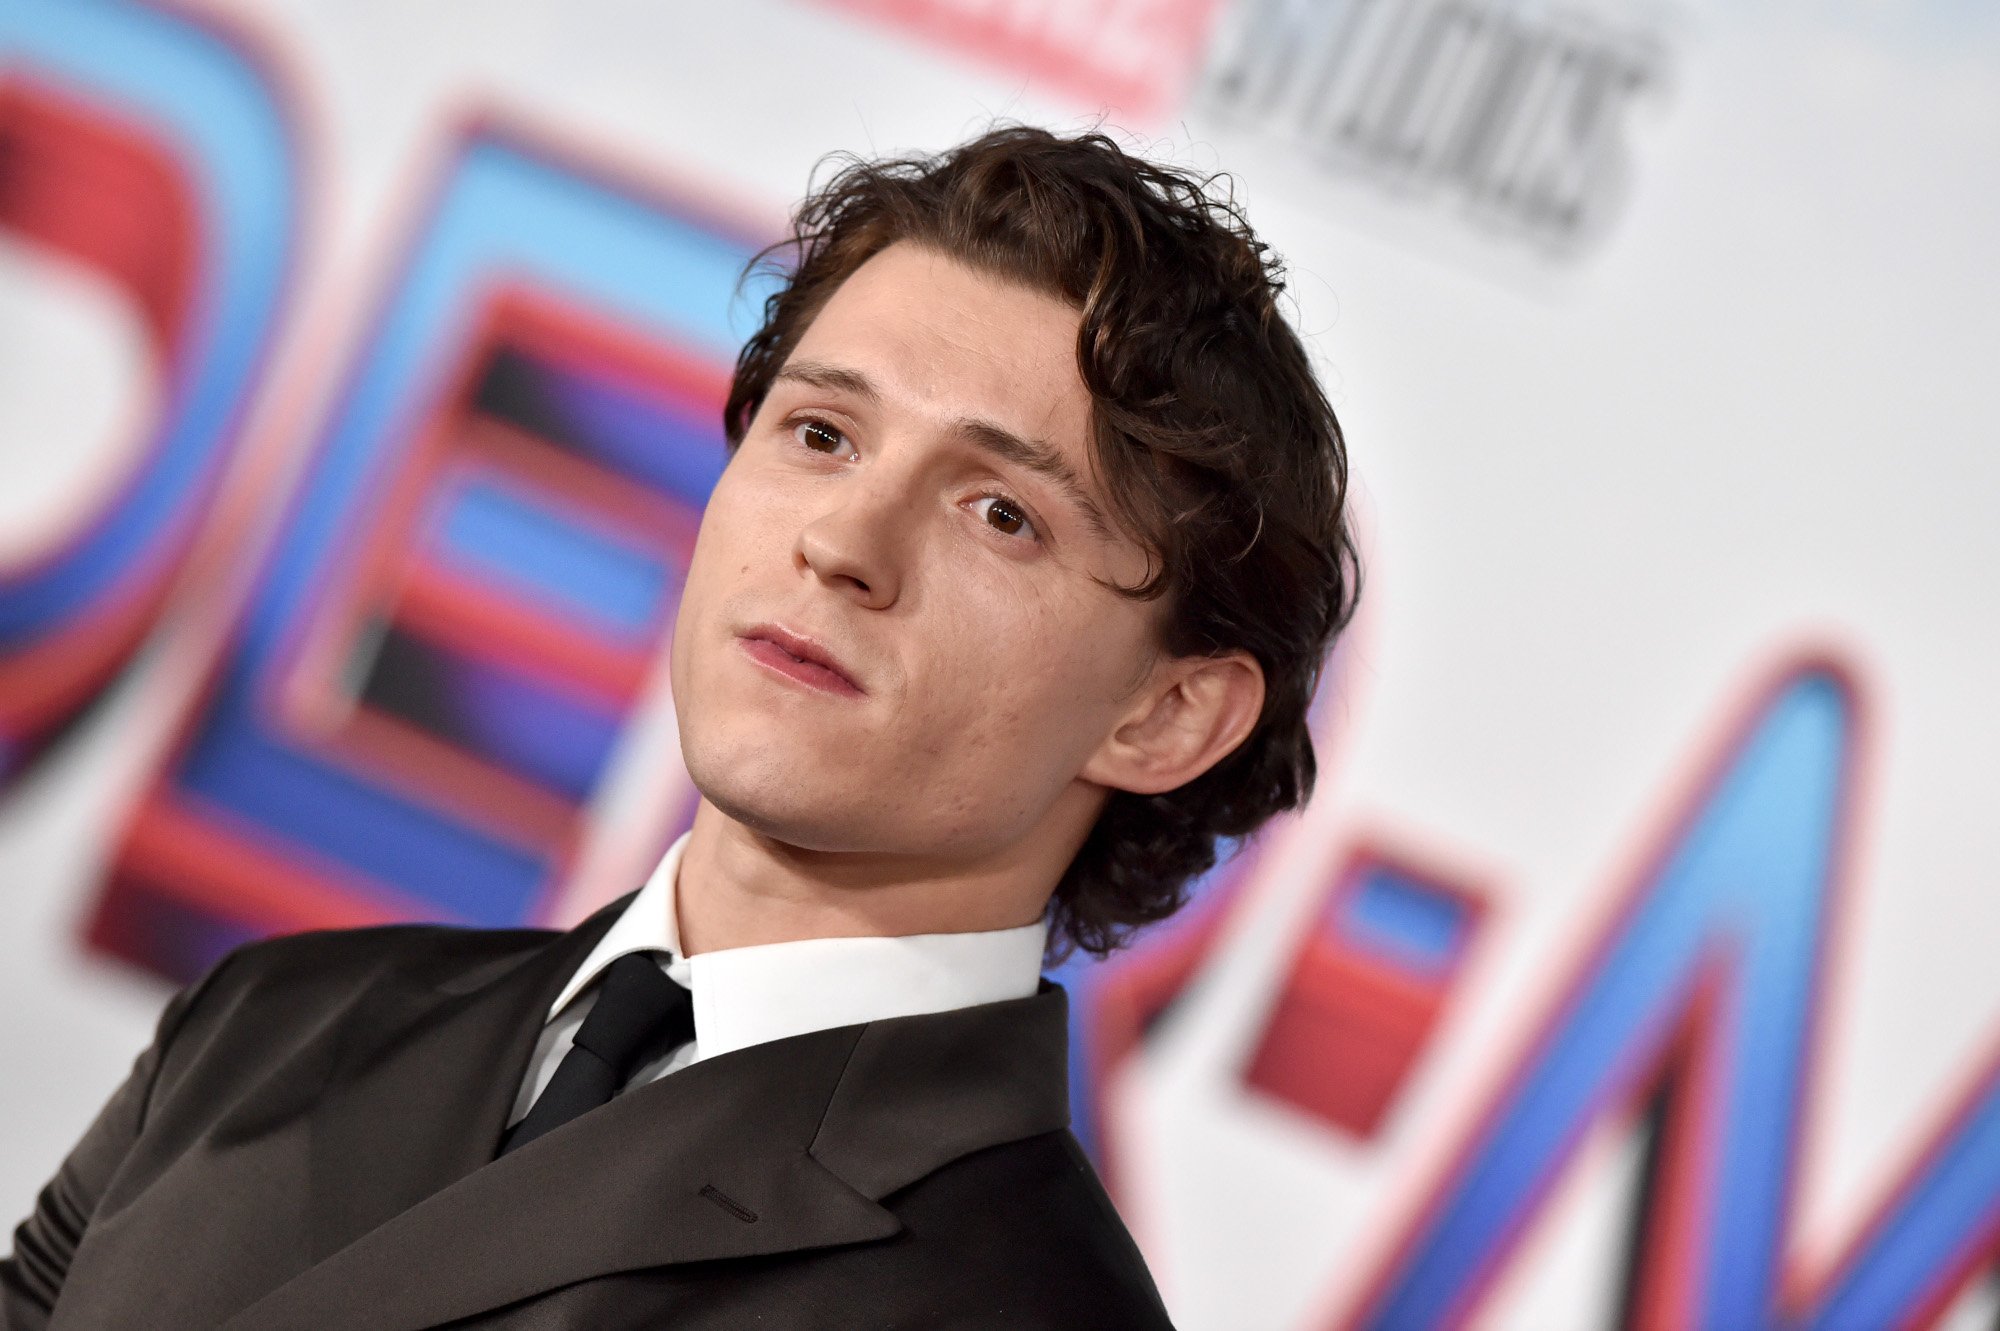 Tom Holland at the premiere for 'Spider-Man: No Way Home.' He's wearing a suit and his hair is slicked back.